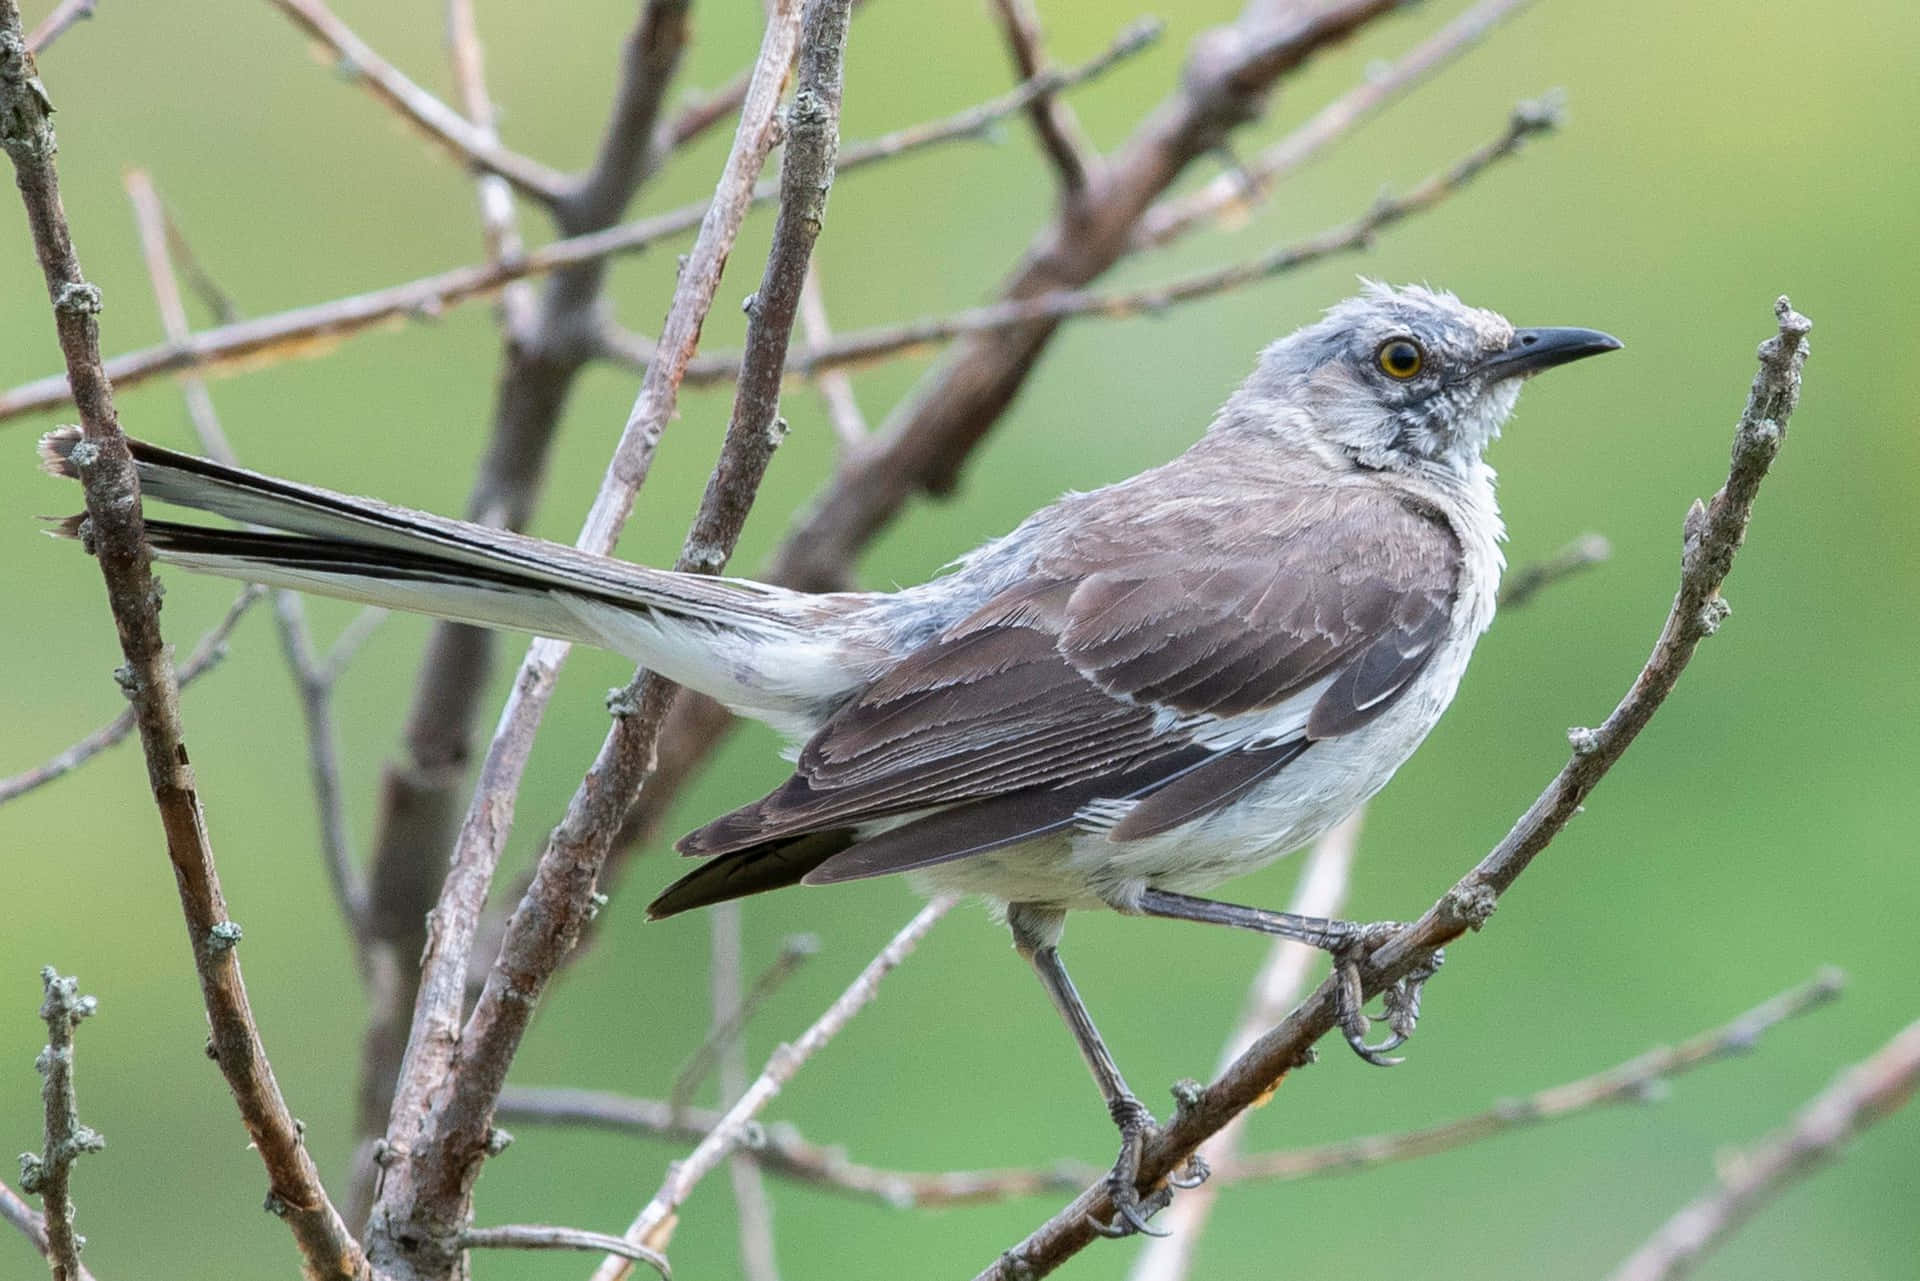 A Mockingbird perched in a flowering tree